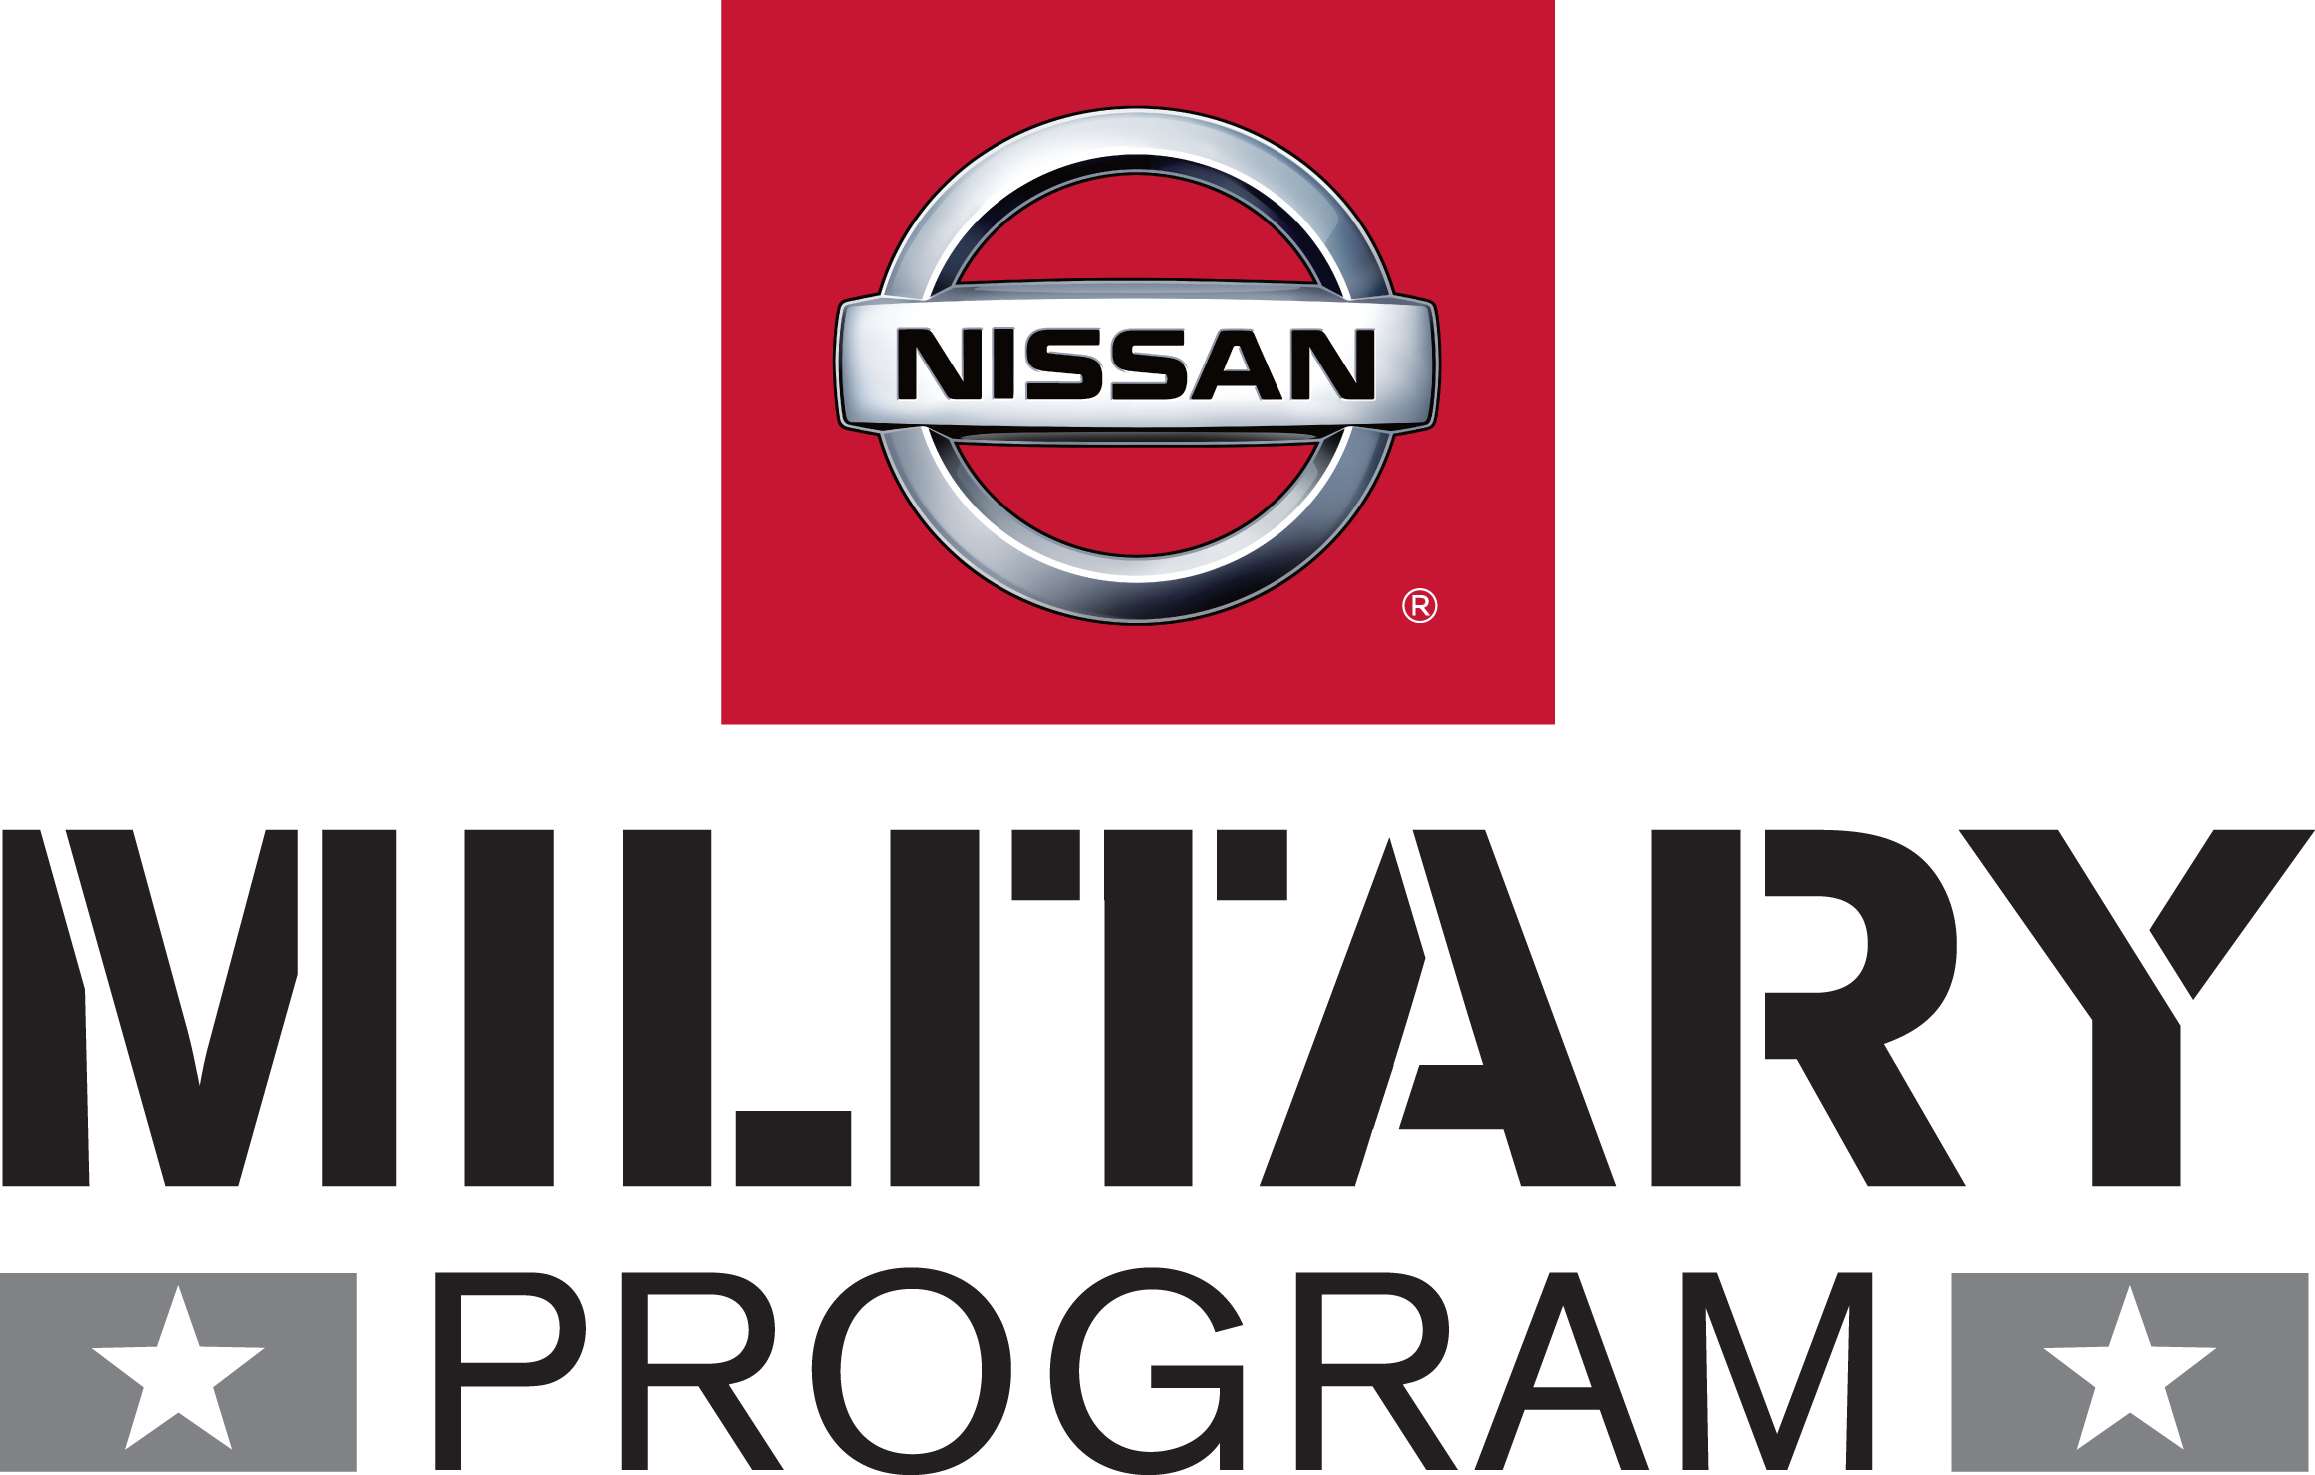 Military Program from Nissan